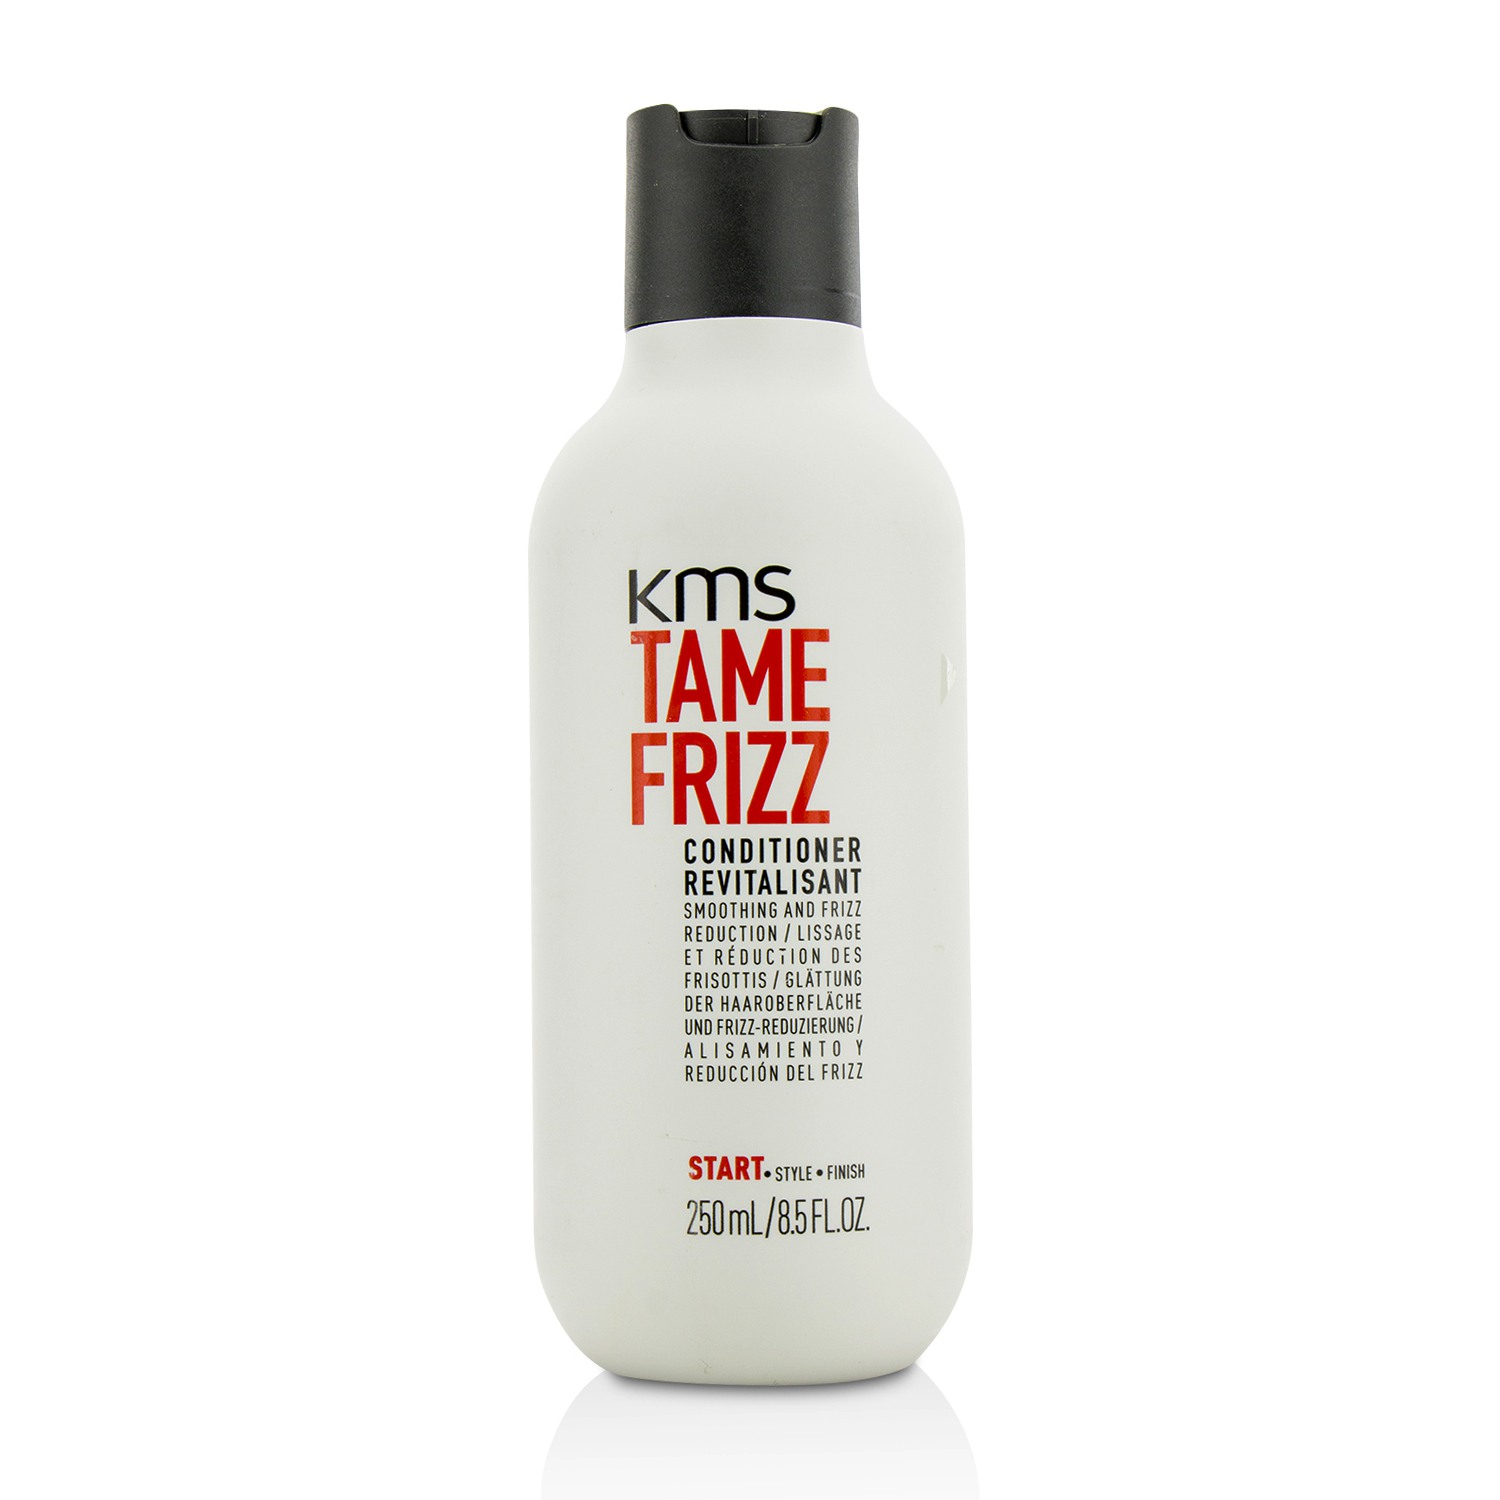 Tame Frizz Conditioner (Smoothing and Frizz Reduction) KMS California Image